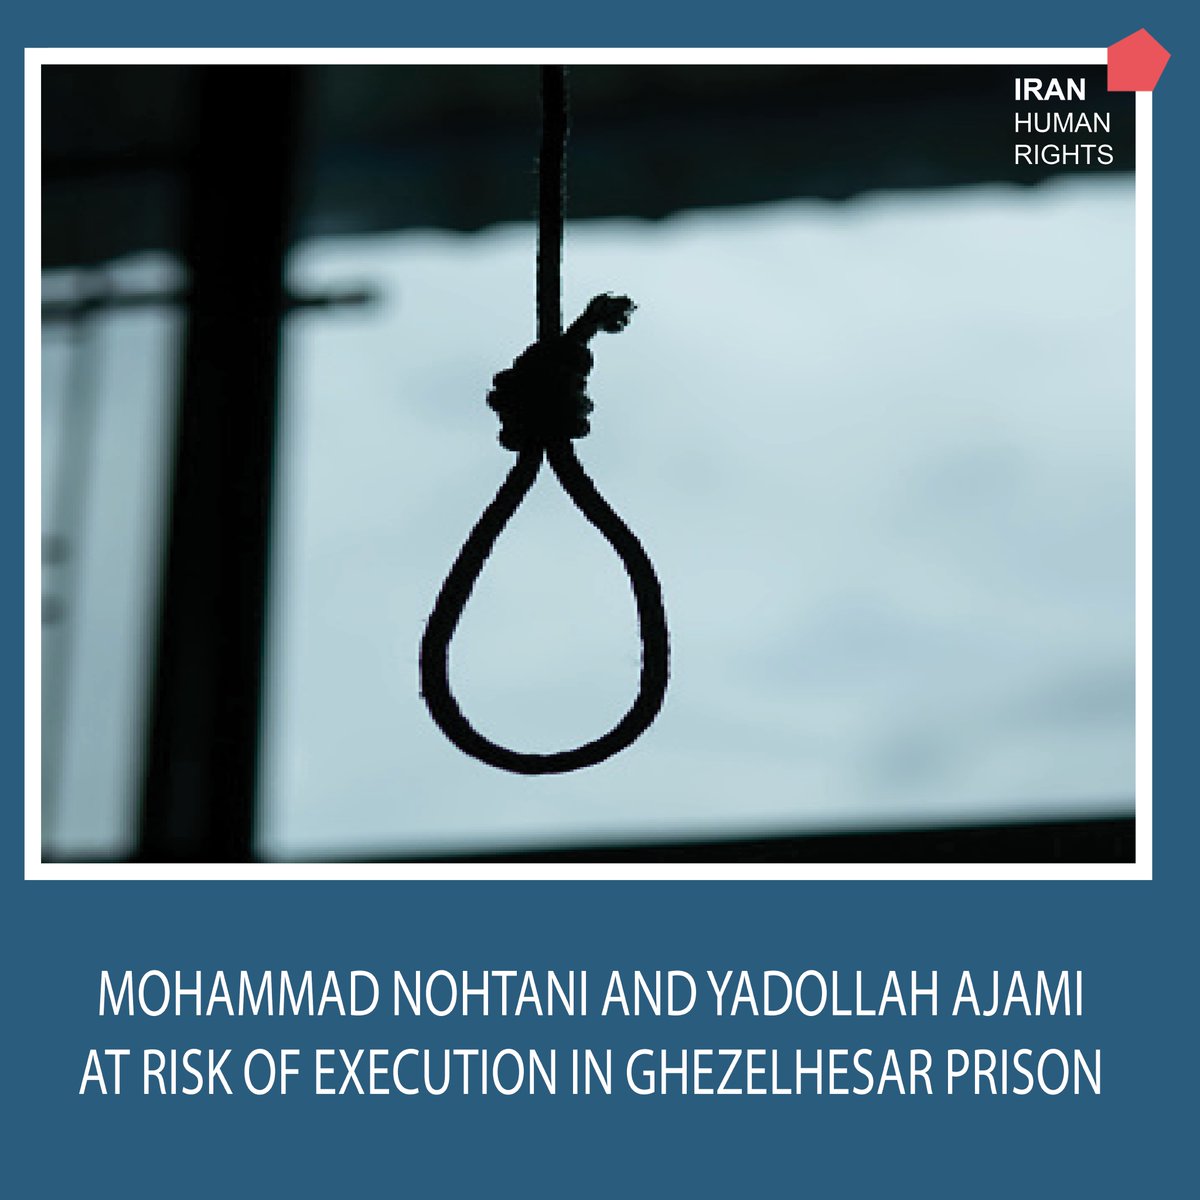 #ExecutionAlert: Mohammad Nohtani and Yadollah Ajami were transferred to solitary confinement yesterday in preparation for their executions in Ghezelhesar Prison.

Both men have been sentenced to qisas (retribution-in-kind) for murder. As the plaintiffs in the case, the victim's